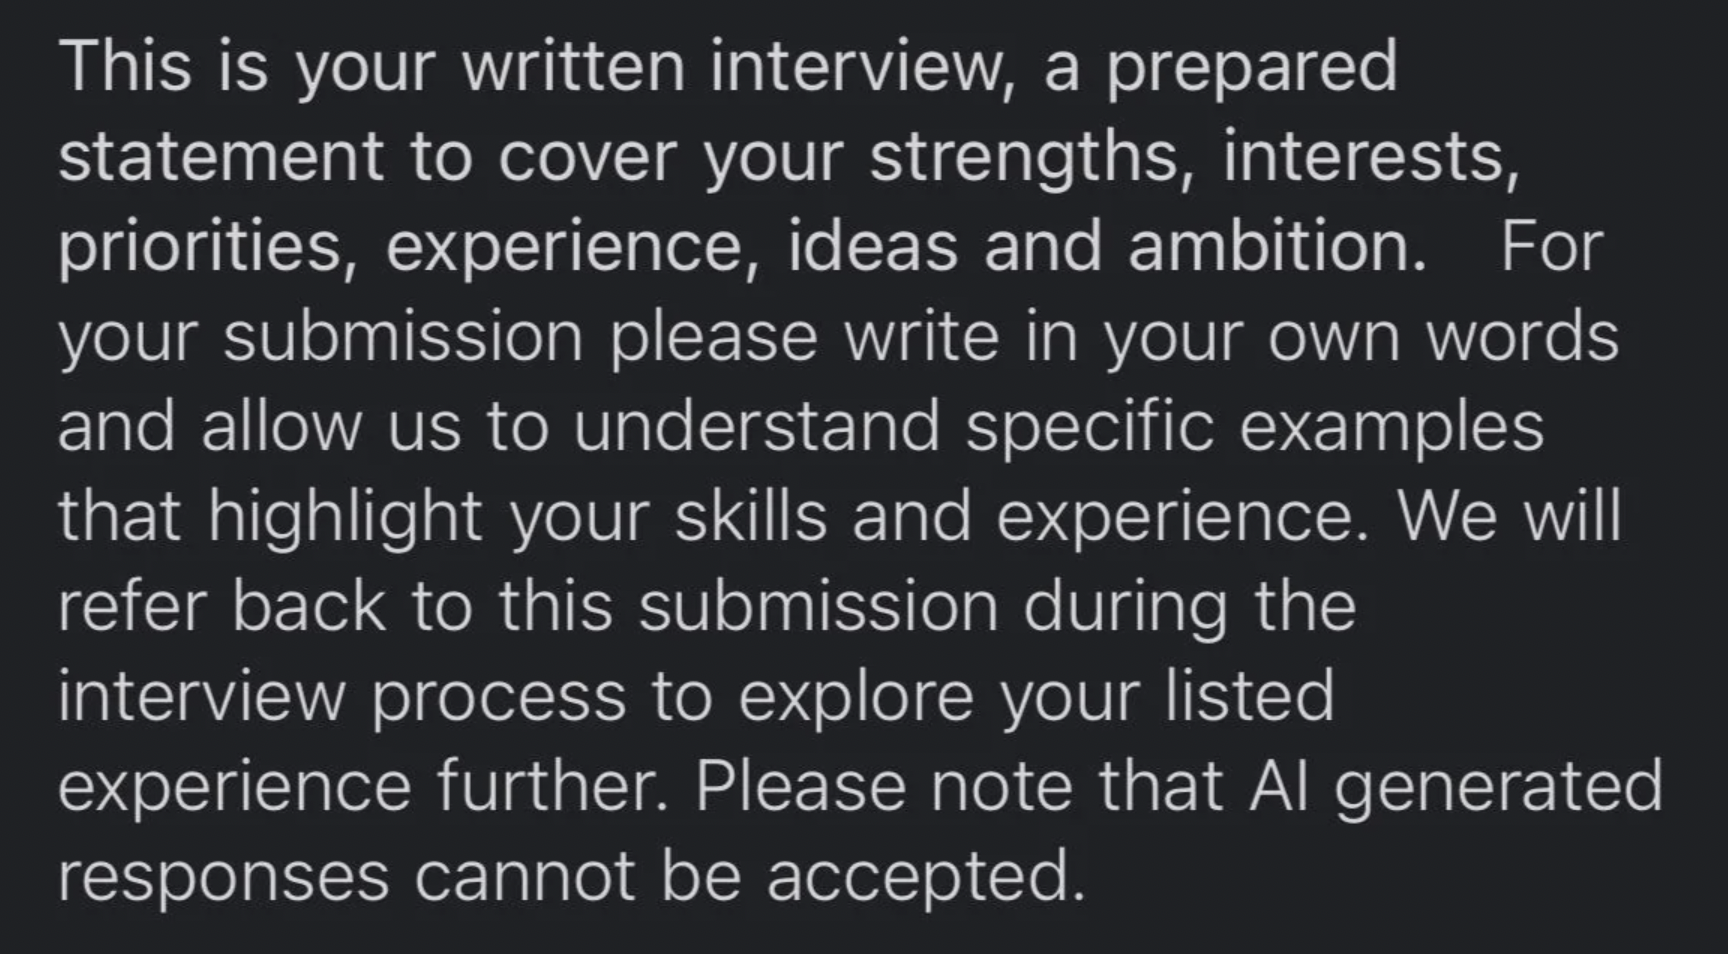 This is your written interview, a prepared statement to cover your strengths, interests, priorities, experience, ideas and ambition. For your submission please write in your own words and allow us to understand specific examples that highlight your skills